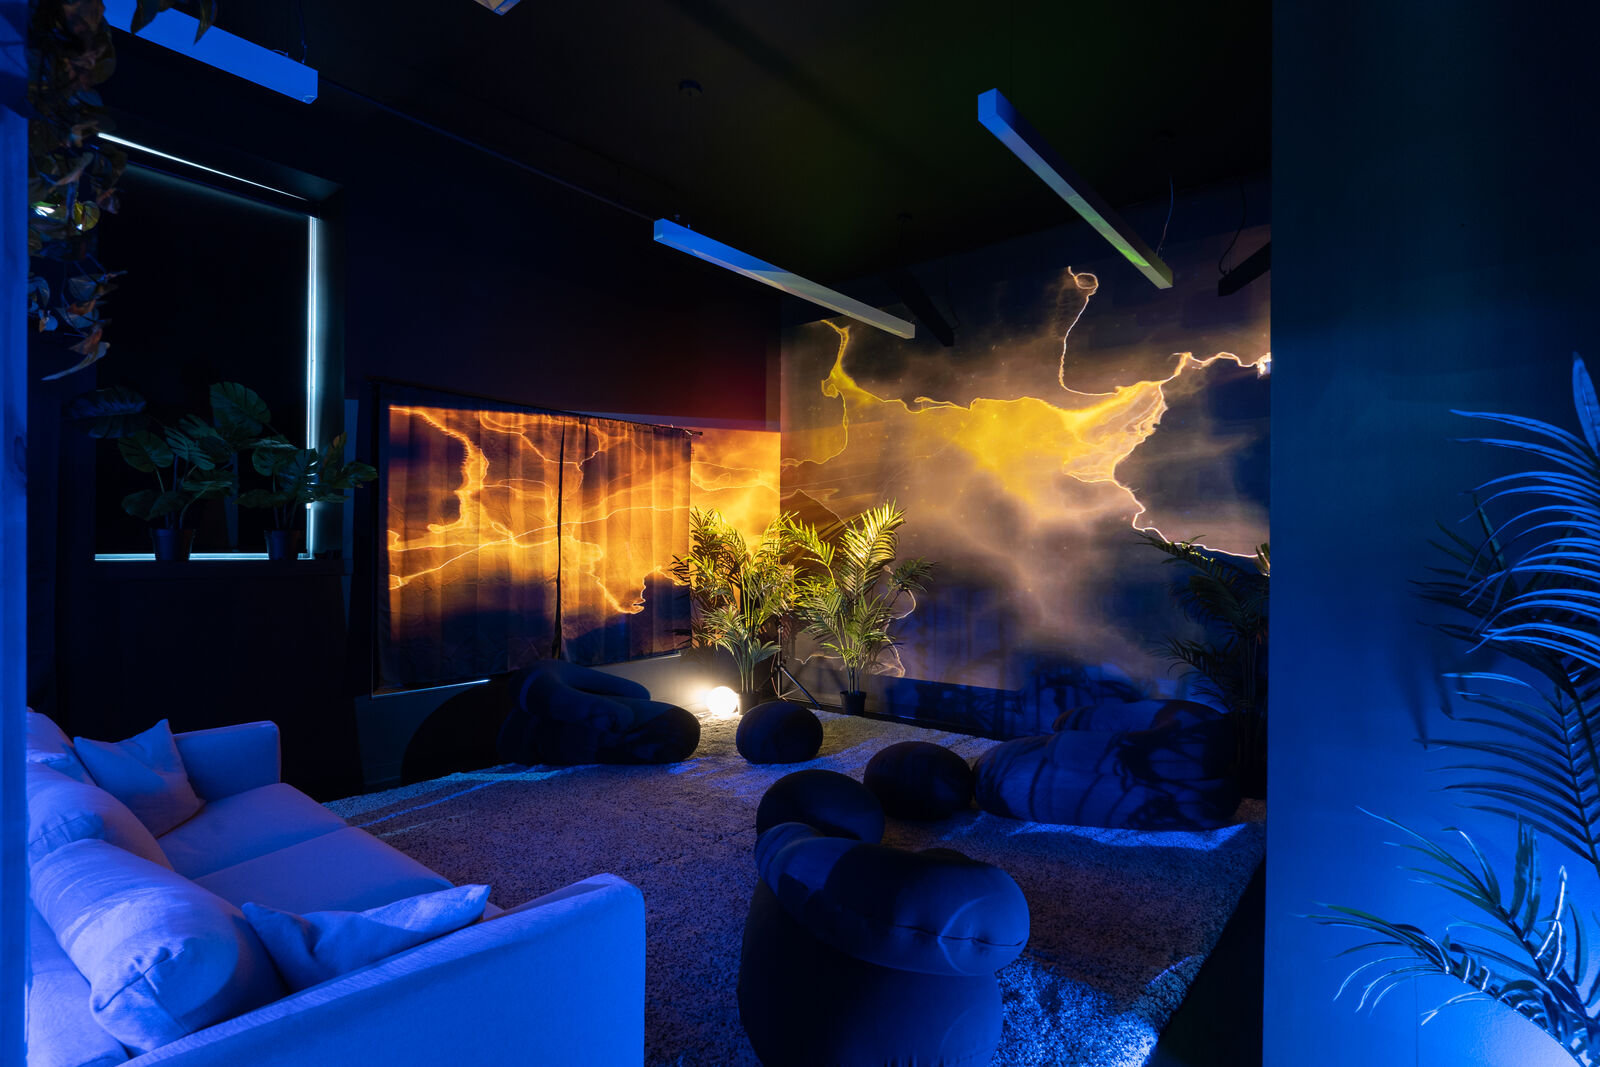 Interior of Supine Horizons exhibition space. Light and visuals are projects onto the walls on the right-hand side, colors are orange and blue. A large white couch is on the left-hand side, smaller dark round cushions are placed in the middle of the room. The leaves of a palm plant peek out on the right corner of the frame.